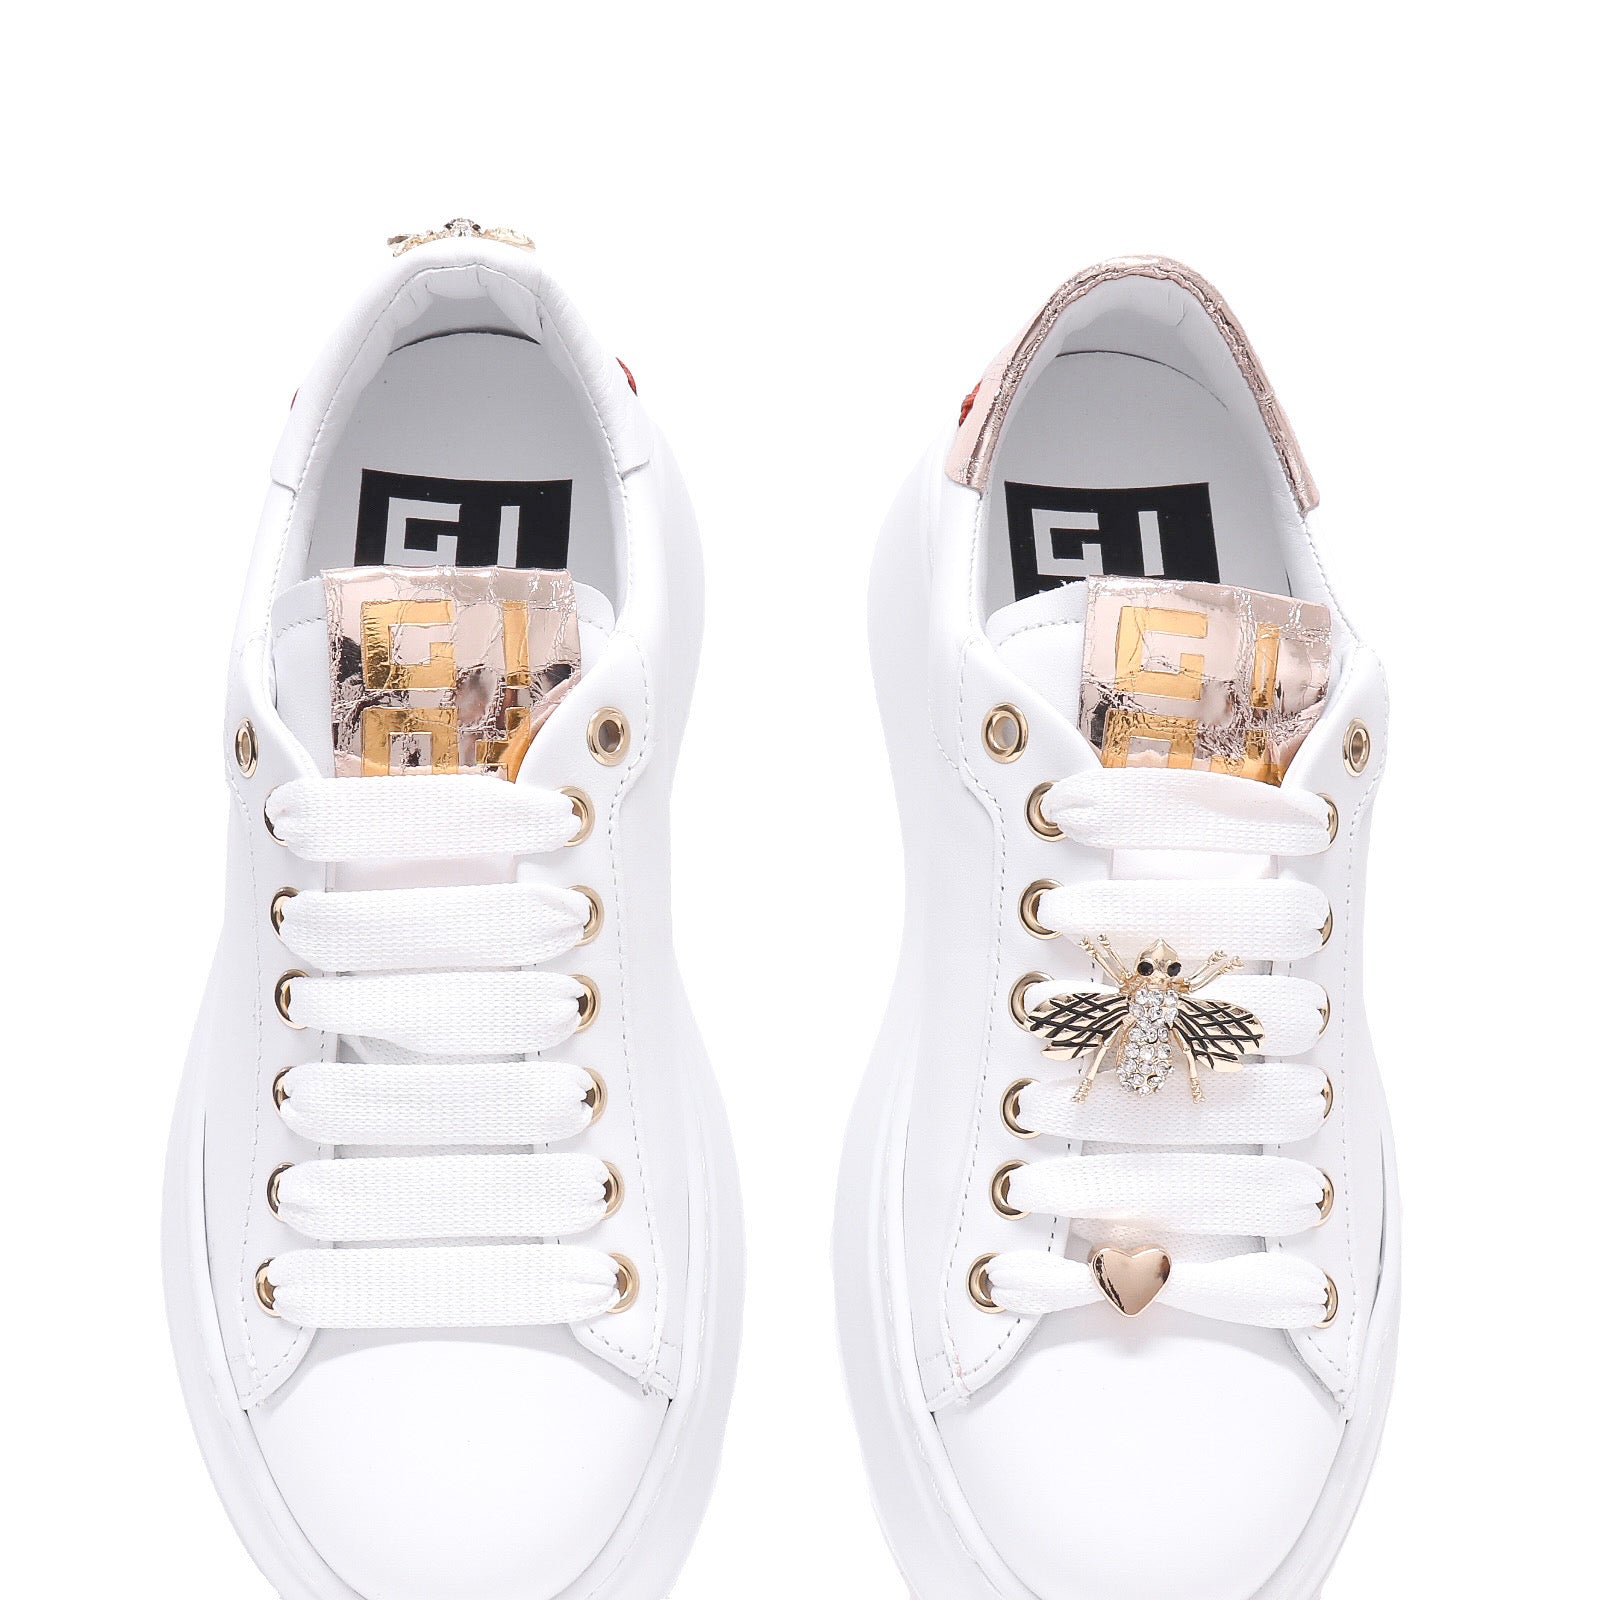 Gio+ Bees sneakers